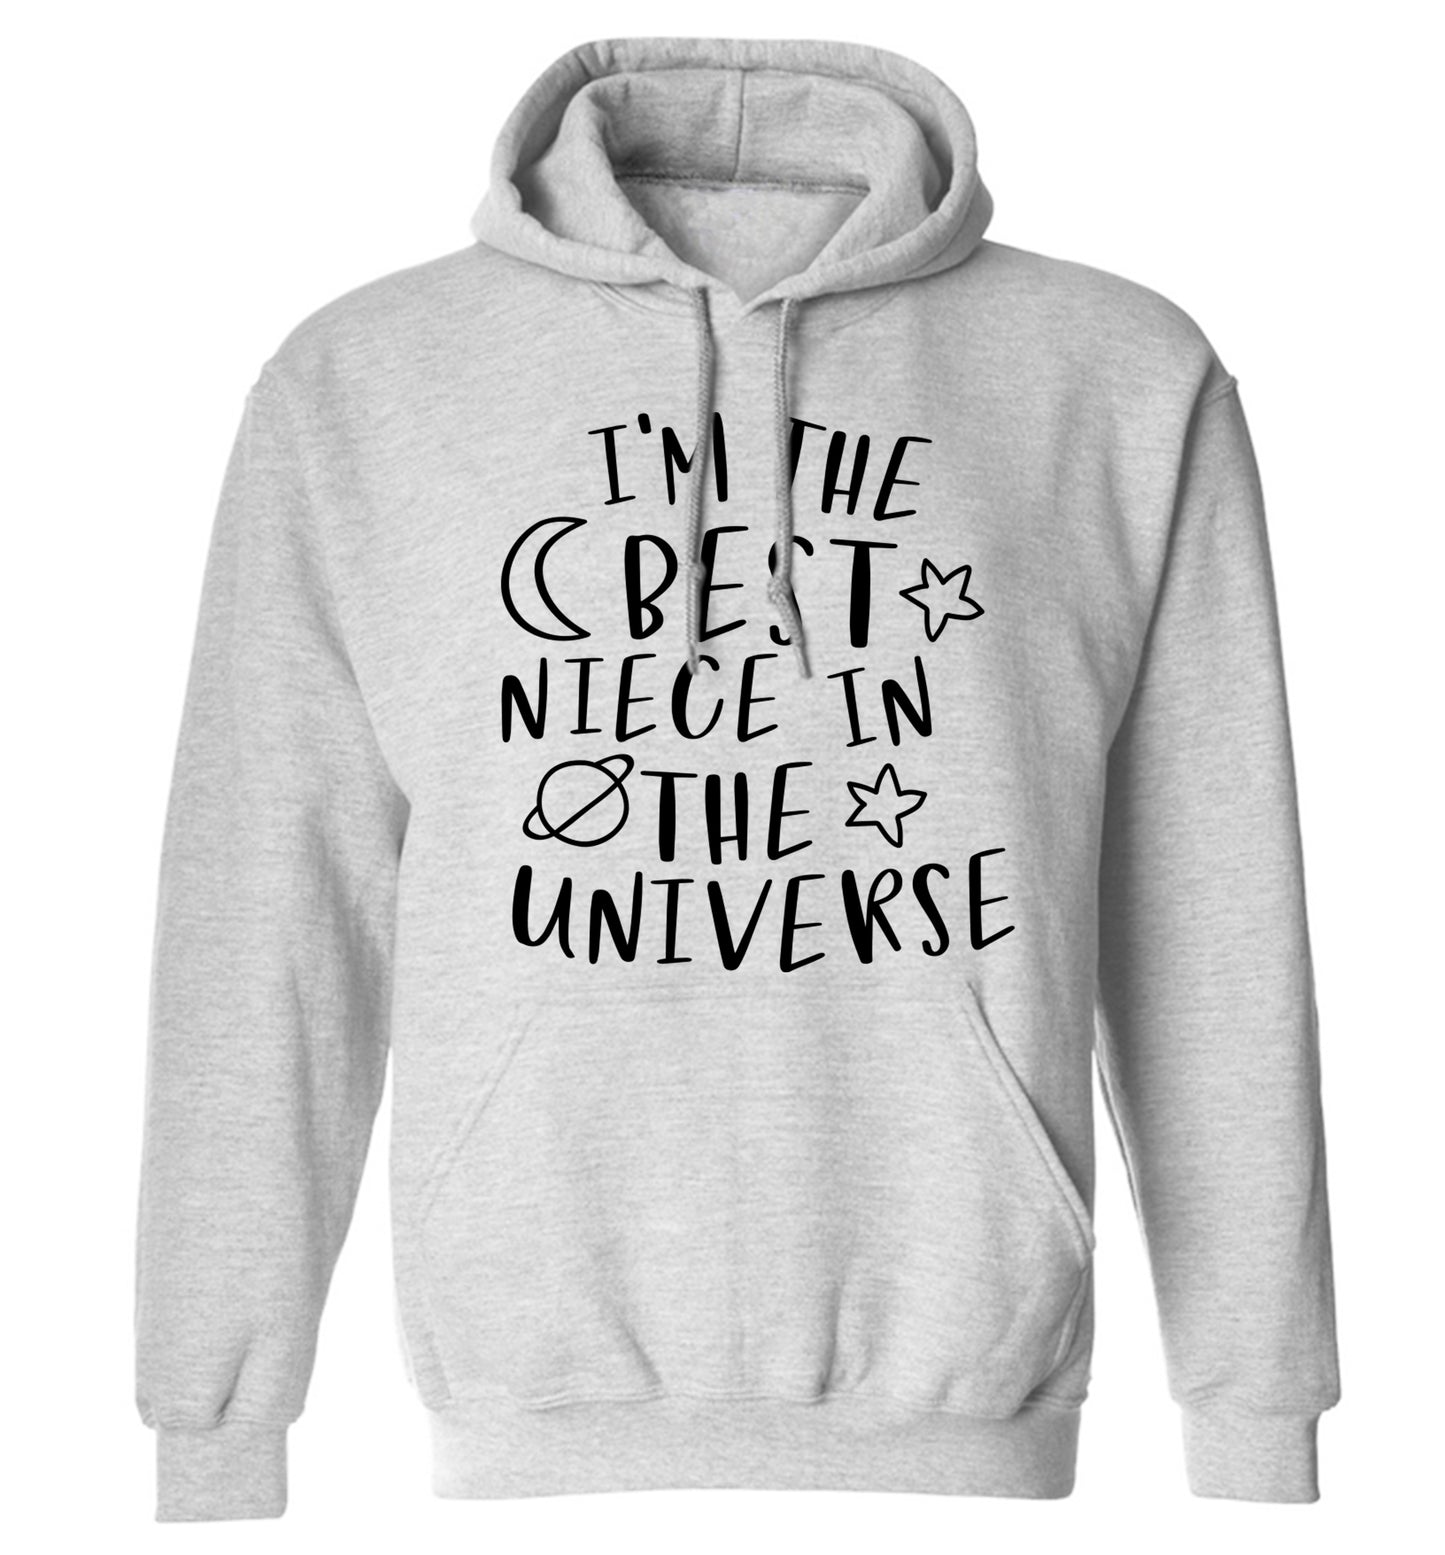 I'm the best niece in the universe adults unisex grey hoodie 2XL